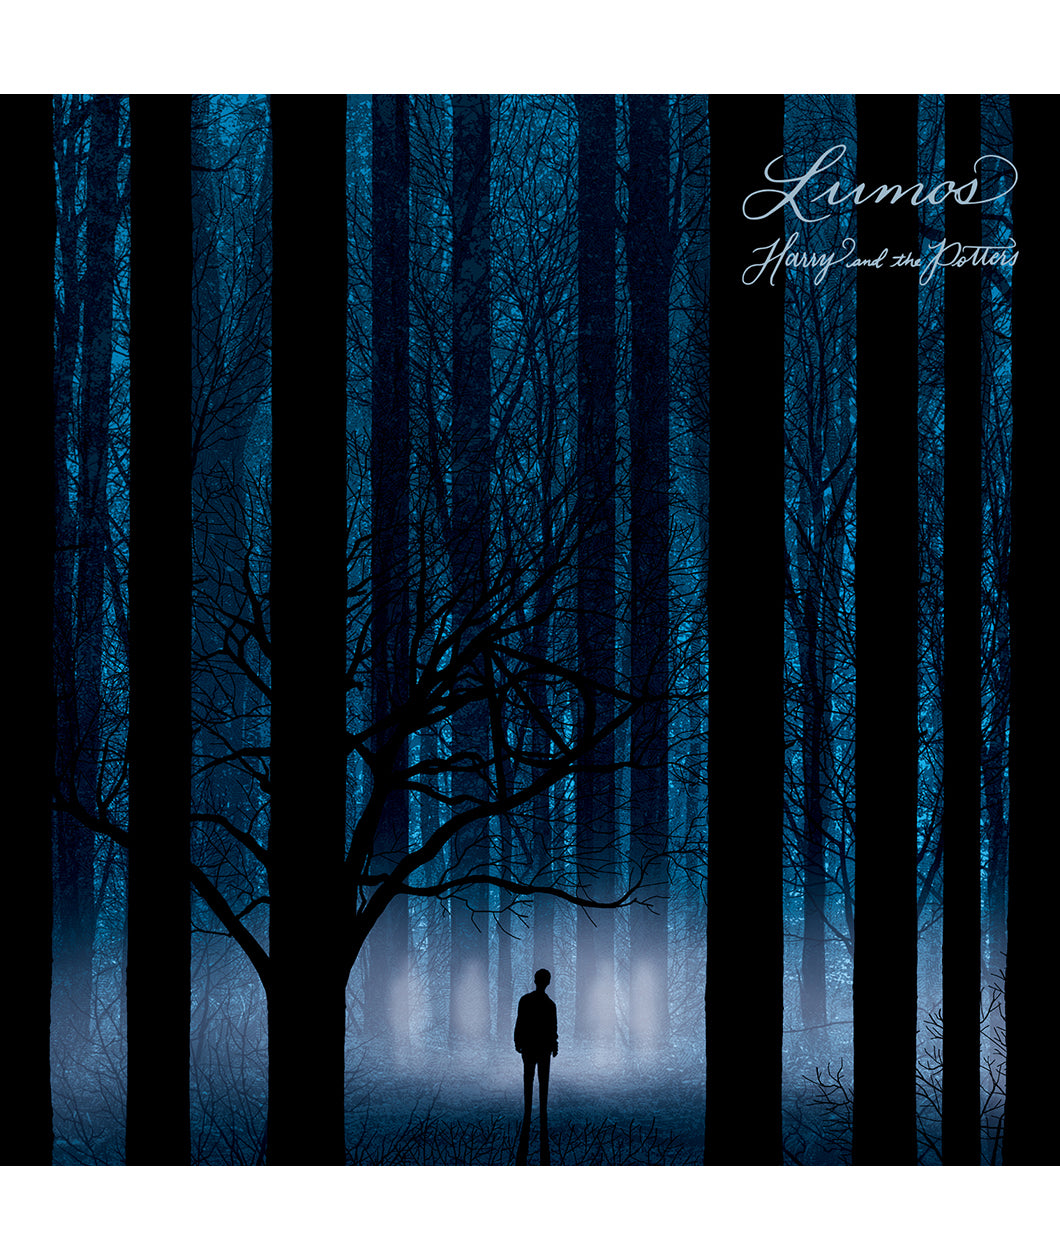 Square album art depicting an ominous forest scene with blue light and black trees, a lone figure standing among them. The text "Lumos" "Harry and the Potters" is in the top right corner in a white script.